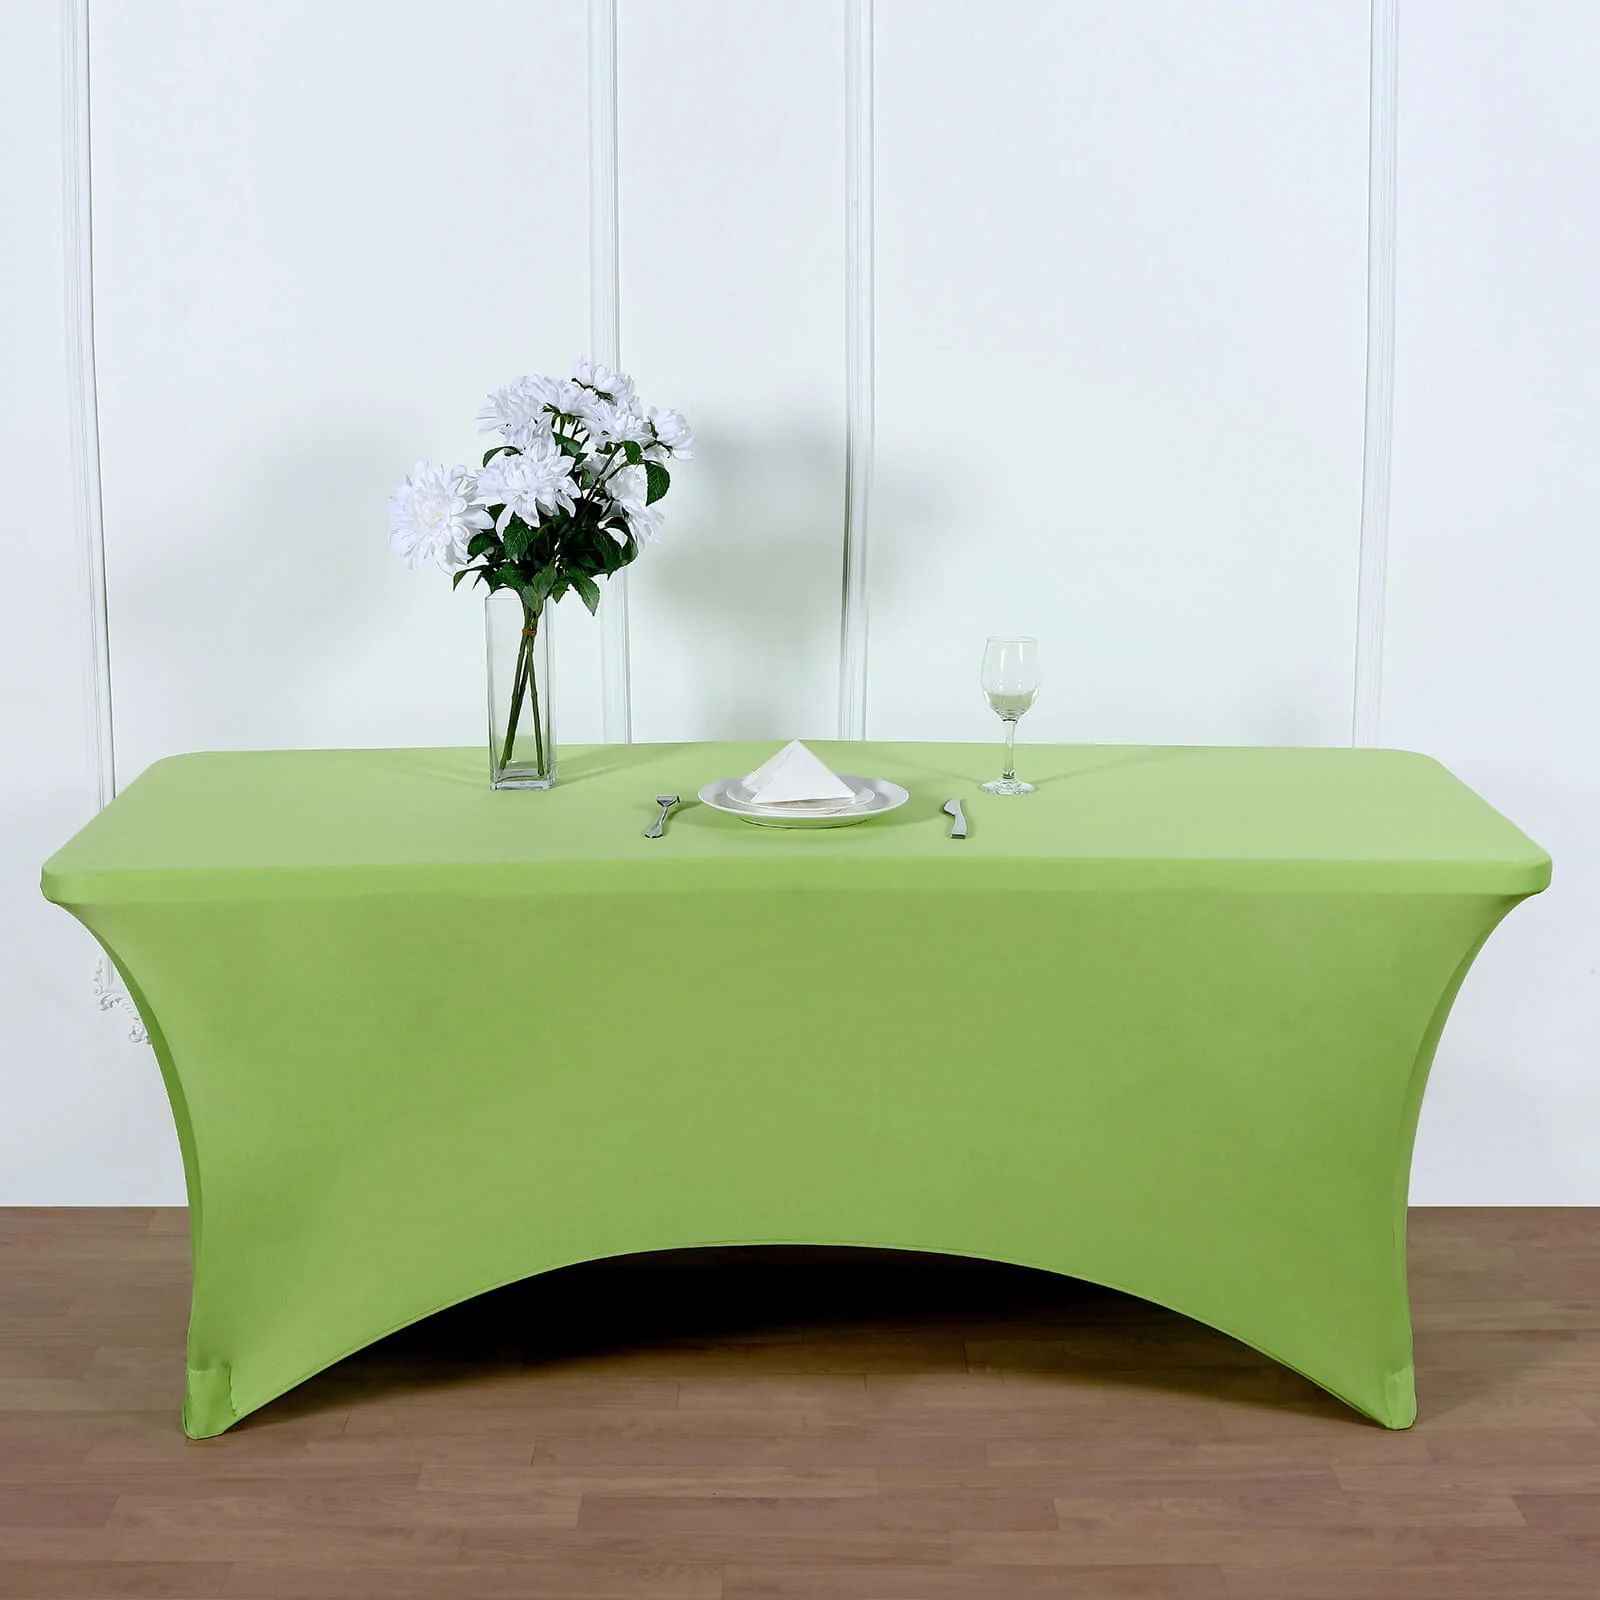 Apple Green - 6 Ft Rectangular Spandex Table Cover Wedding Party - £26.48 GBP